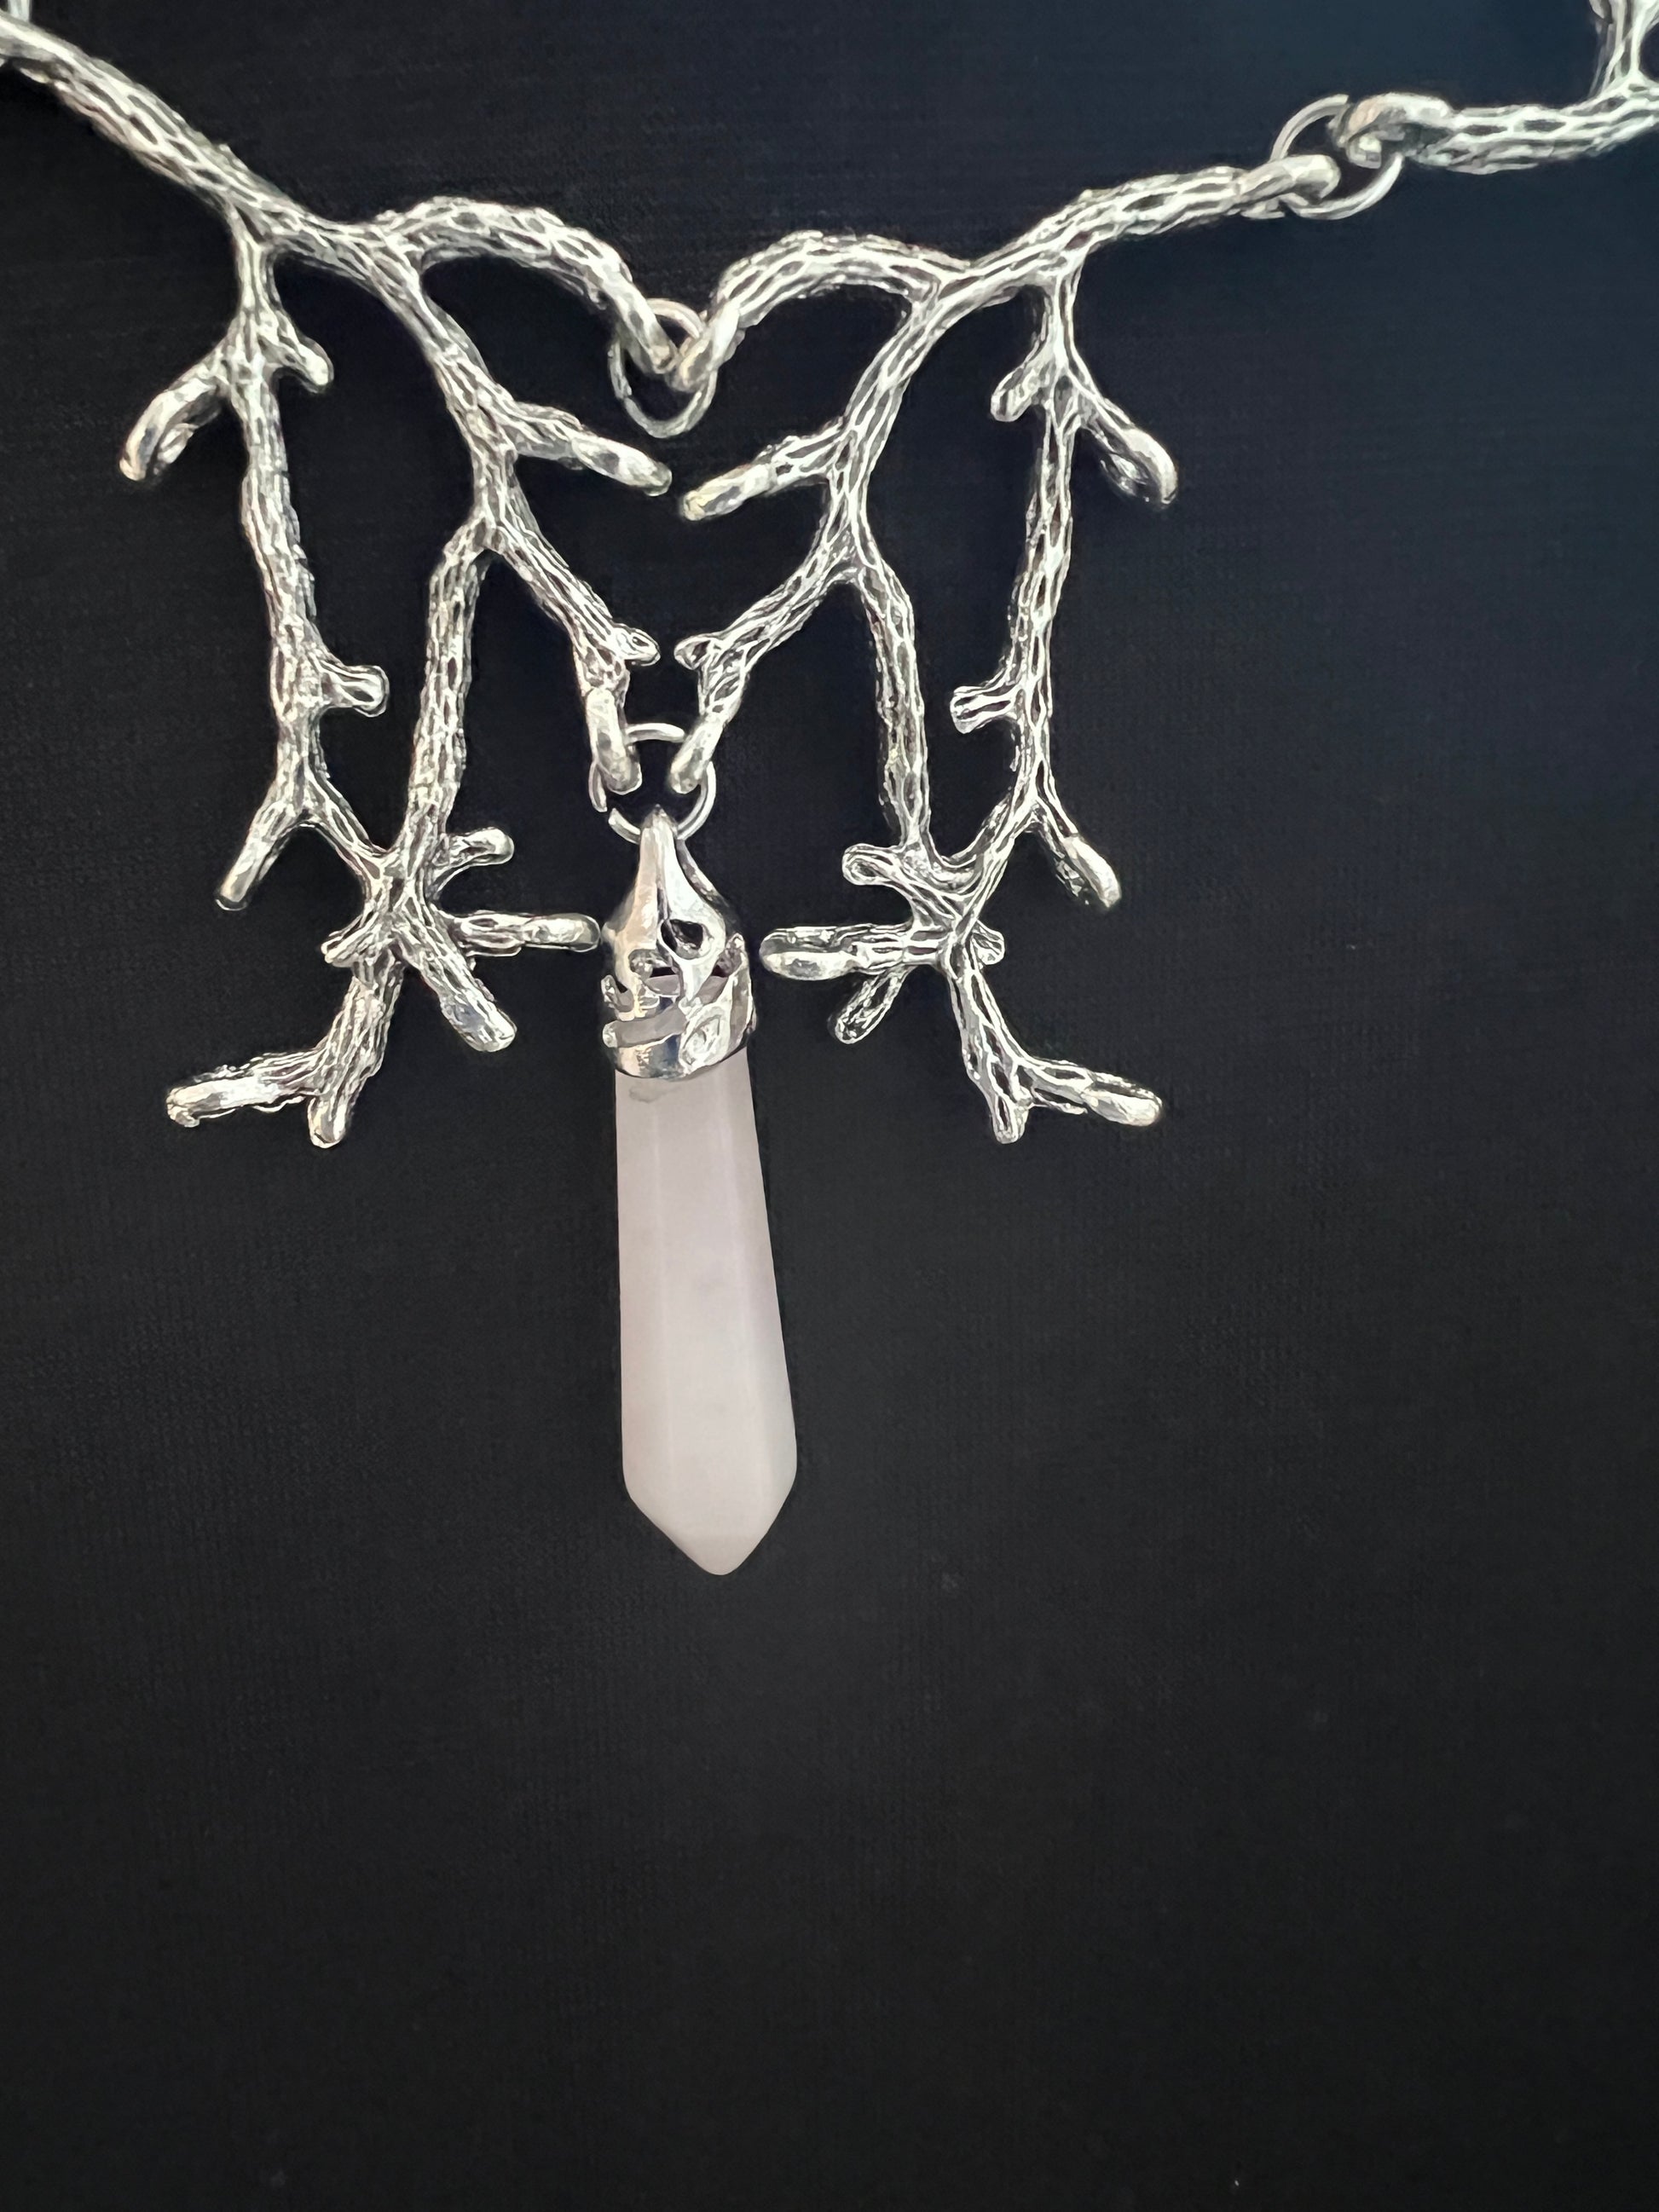 Silver Metal Tree Branch and Pink Crystal Necklace, Head Jewelry.